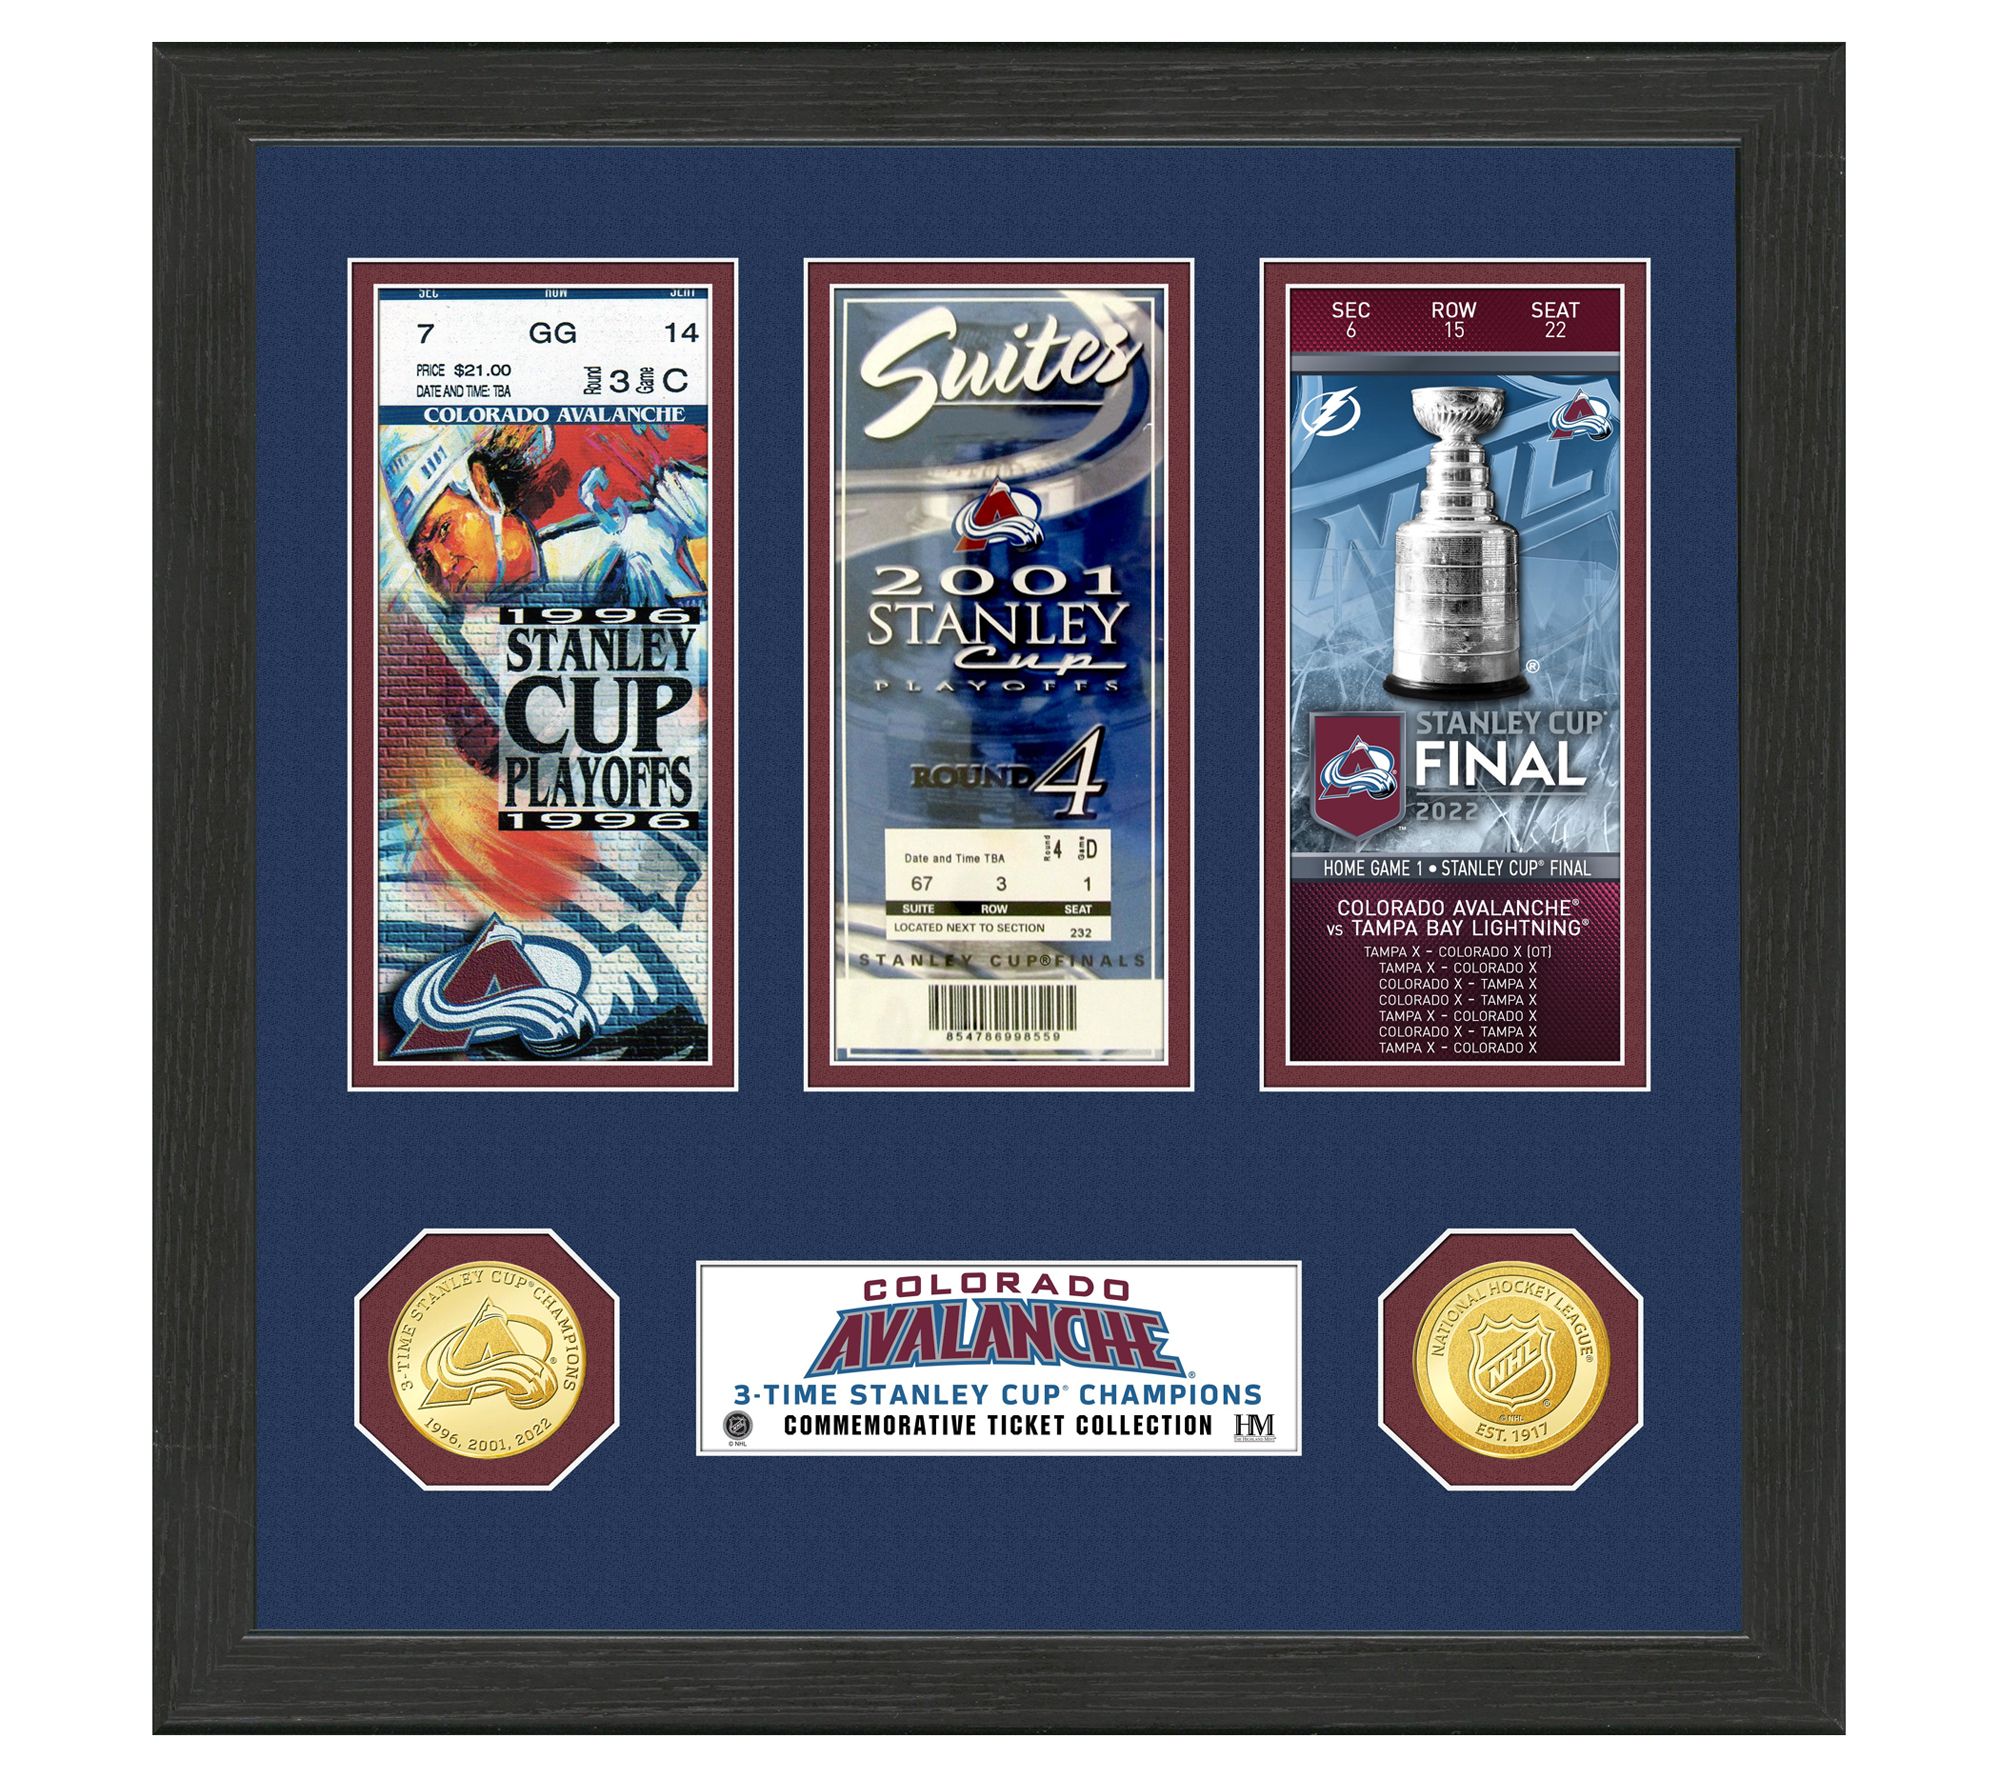 Colorado Avalanche 3X Stanley Cup Champions Bronze Coin Legacy Photo Mint